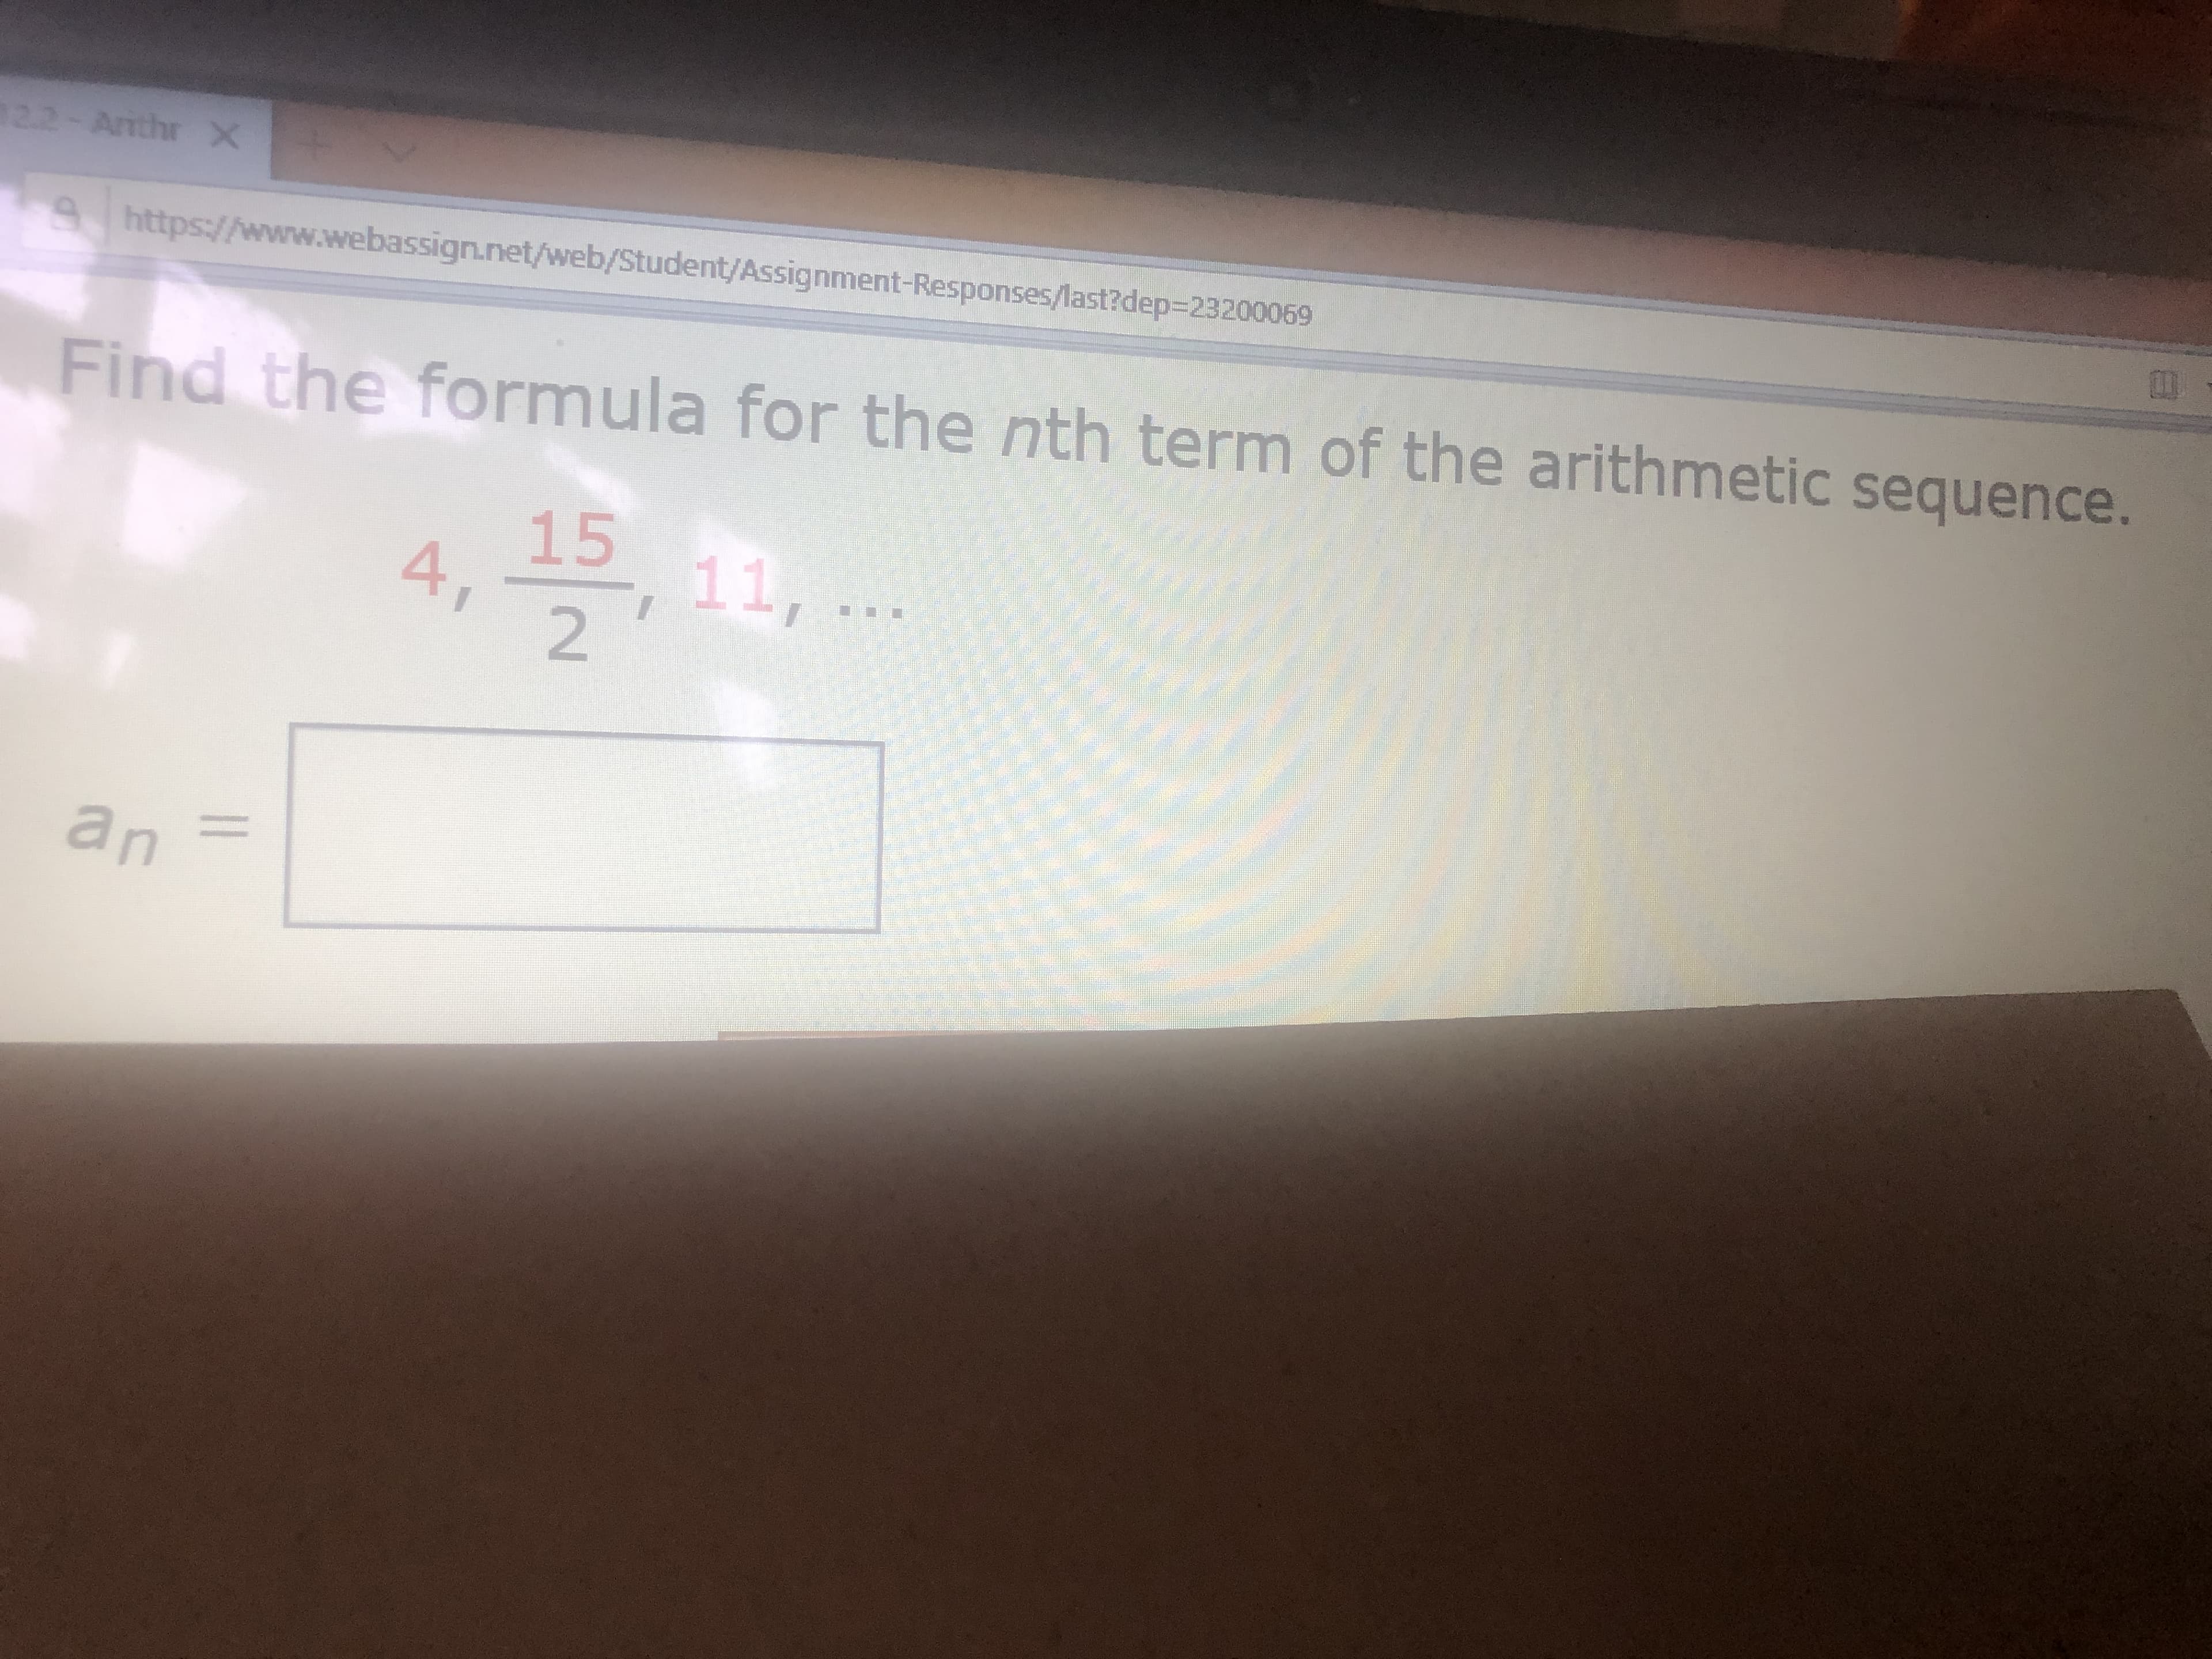 69
Find the formula for the nth term of the arithmetic sequence.
15
EGO
4,
11,..
2
